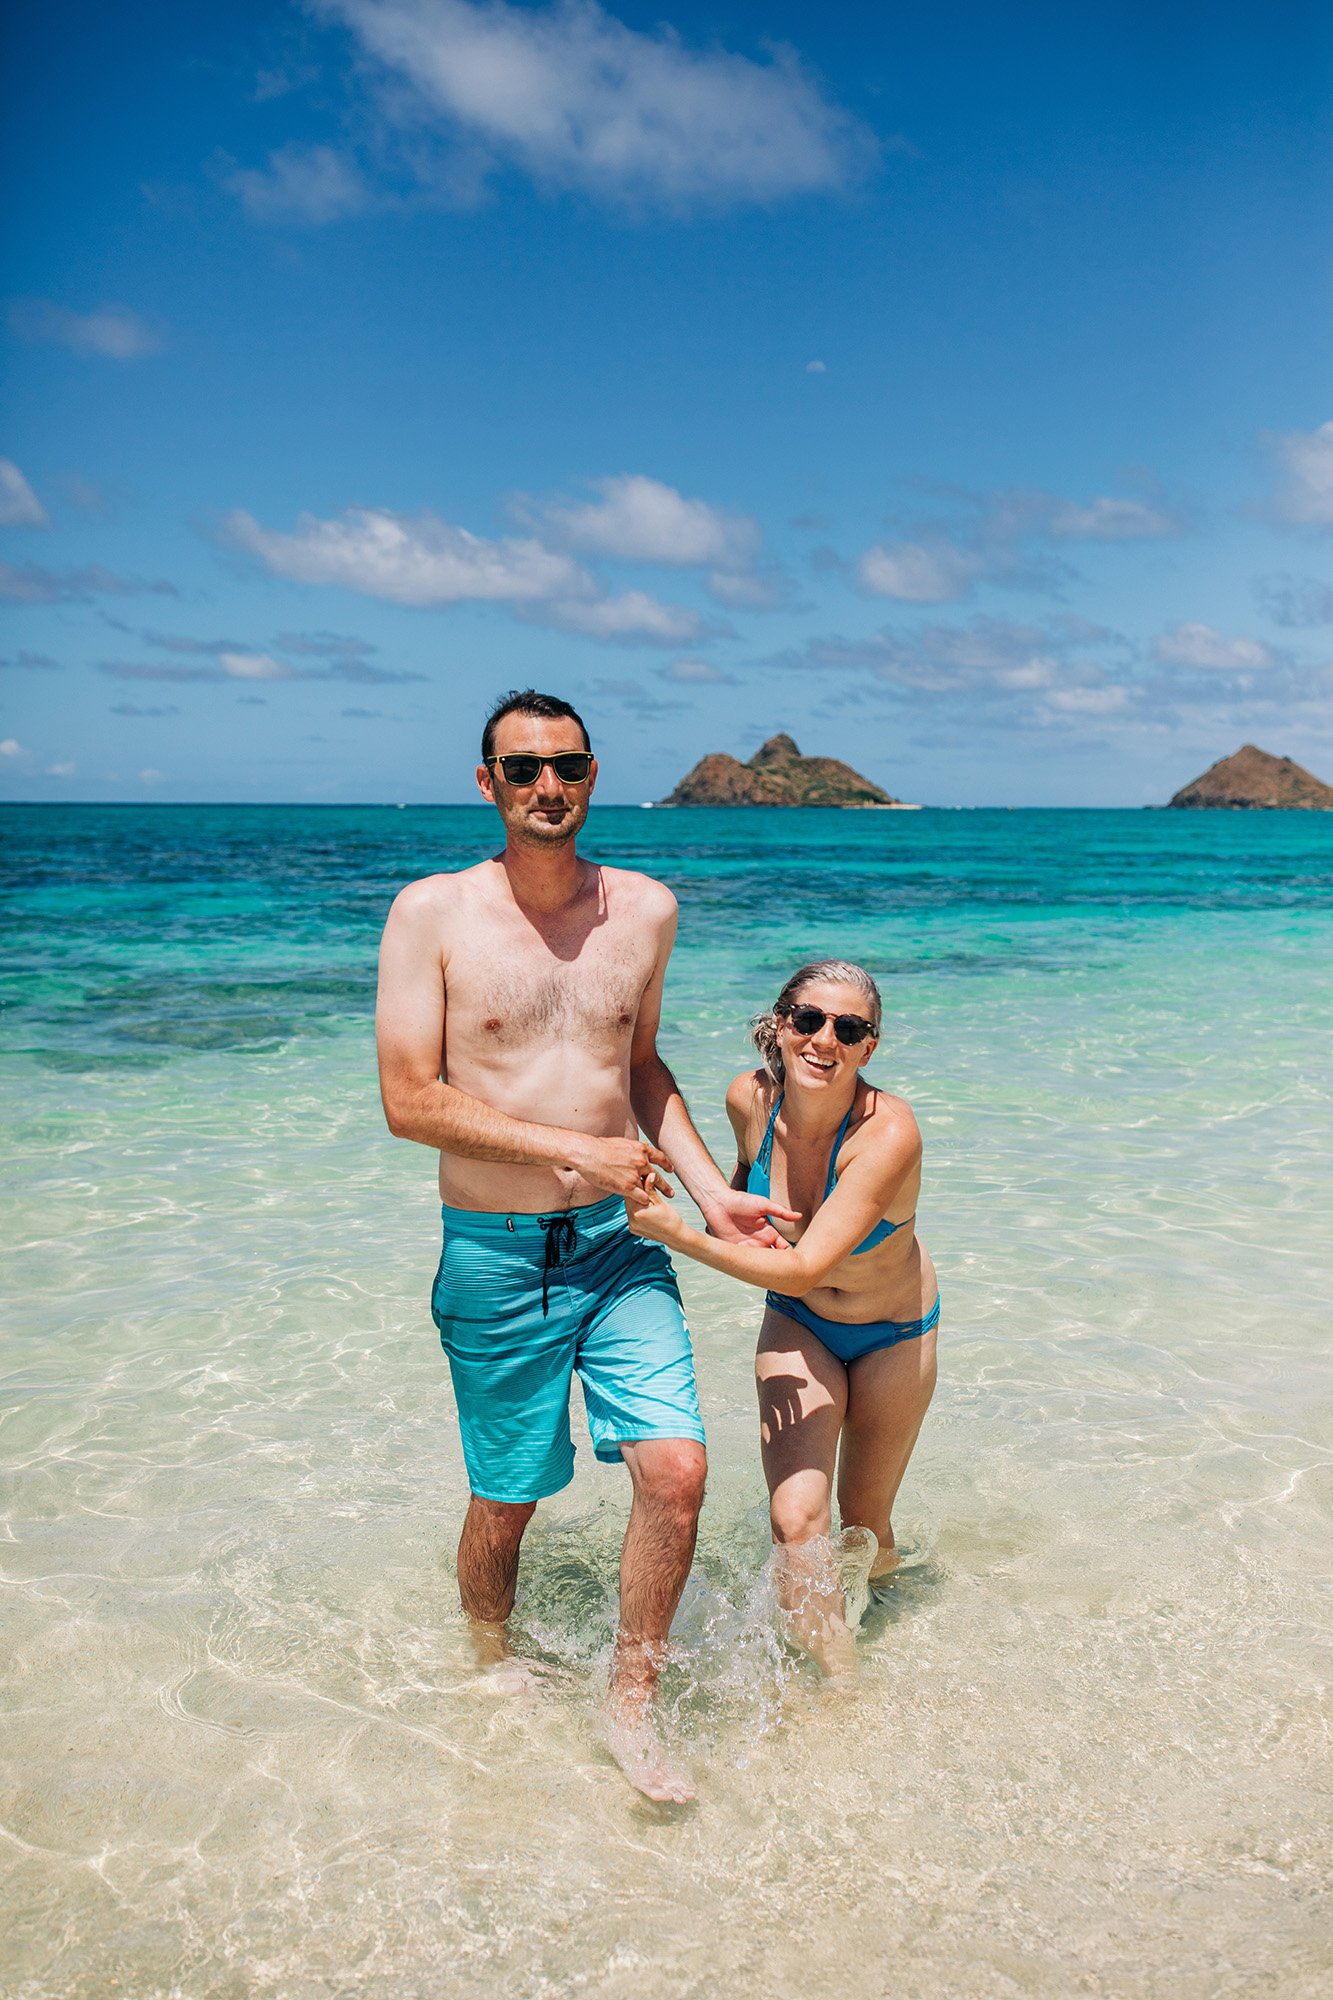 Ruta and Greg wades through the blue waters of Oahu, Hawaii.